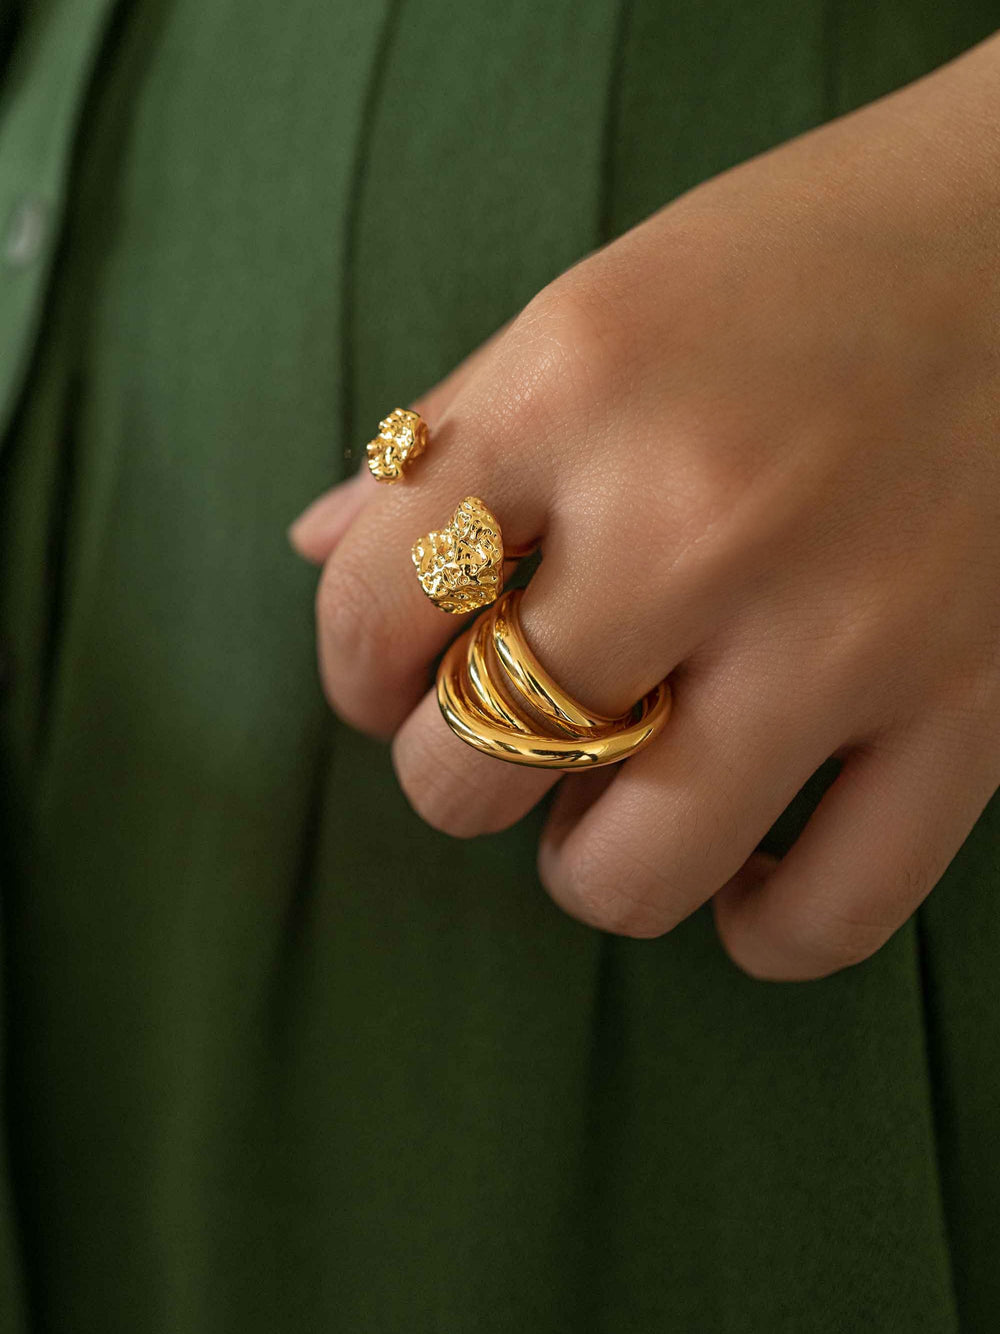 Finger wearing a gold ring